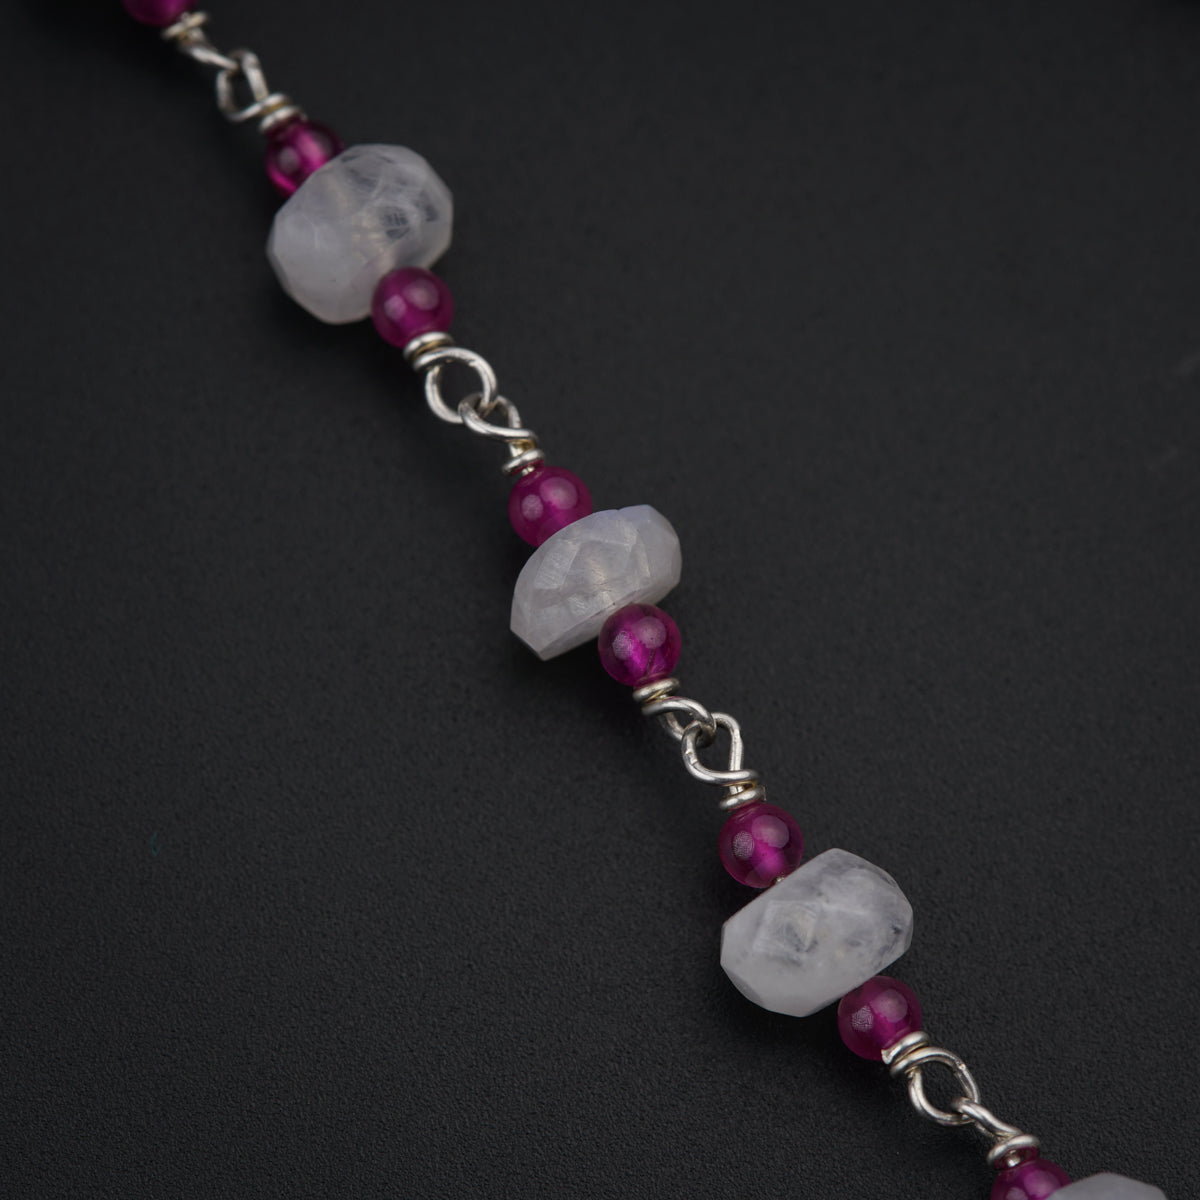 a bracelet with a beaded chain and purple beads